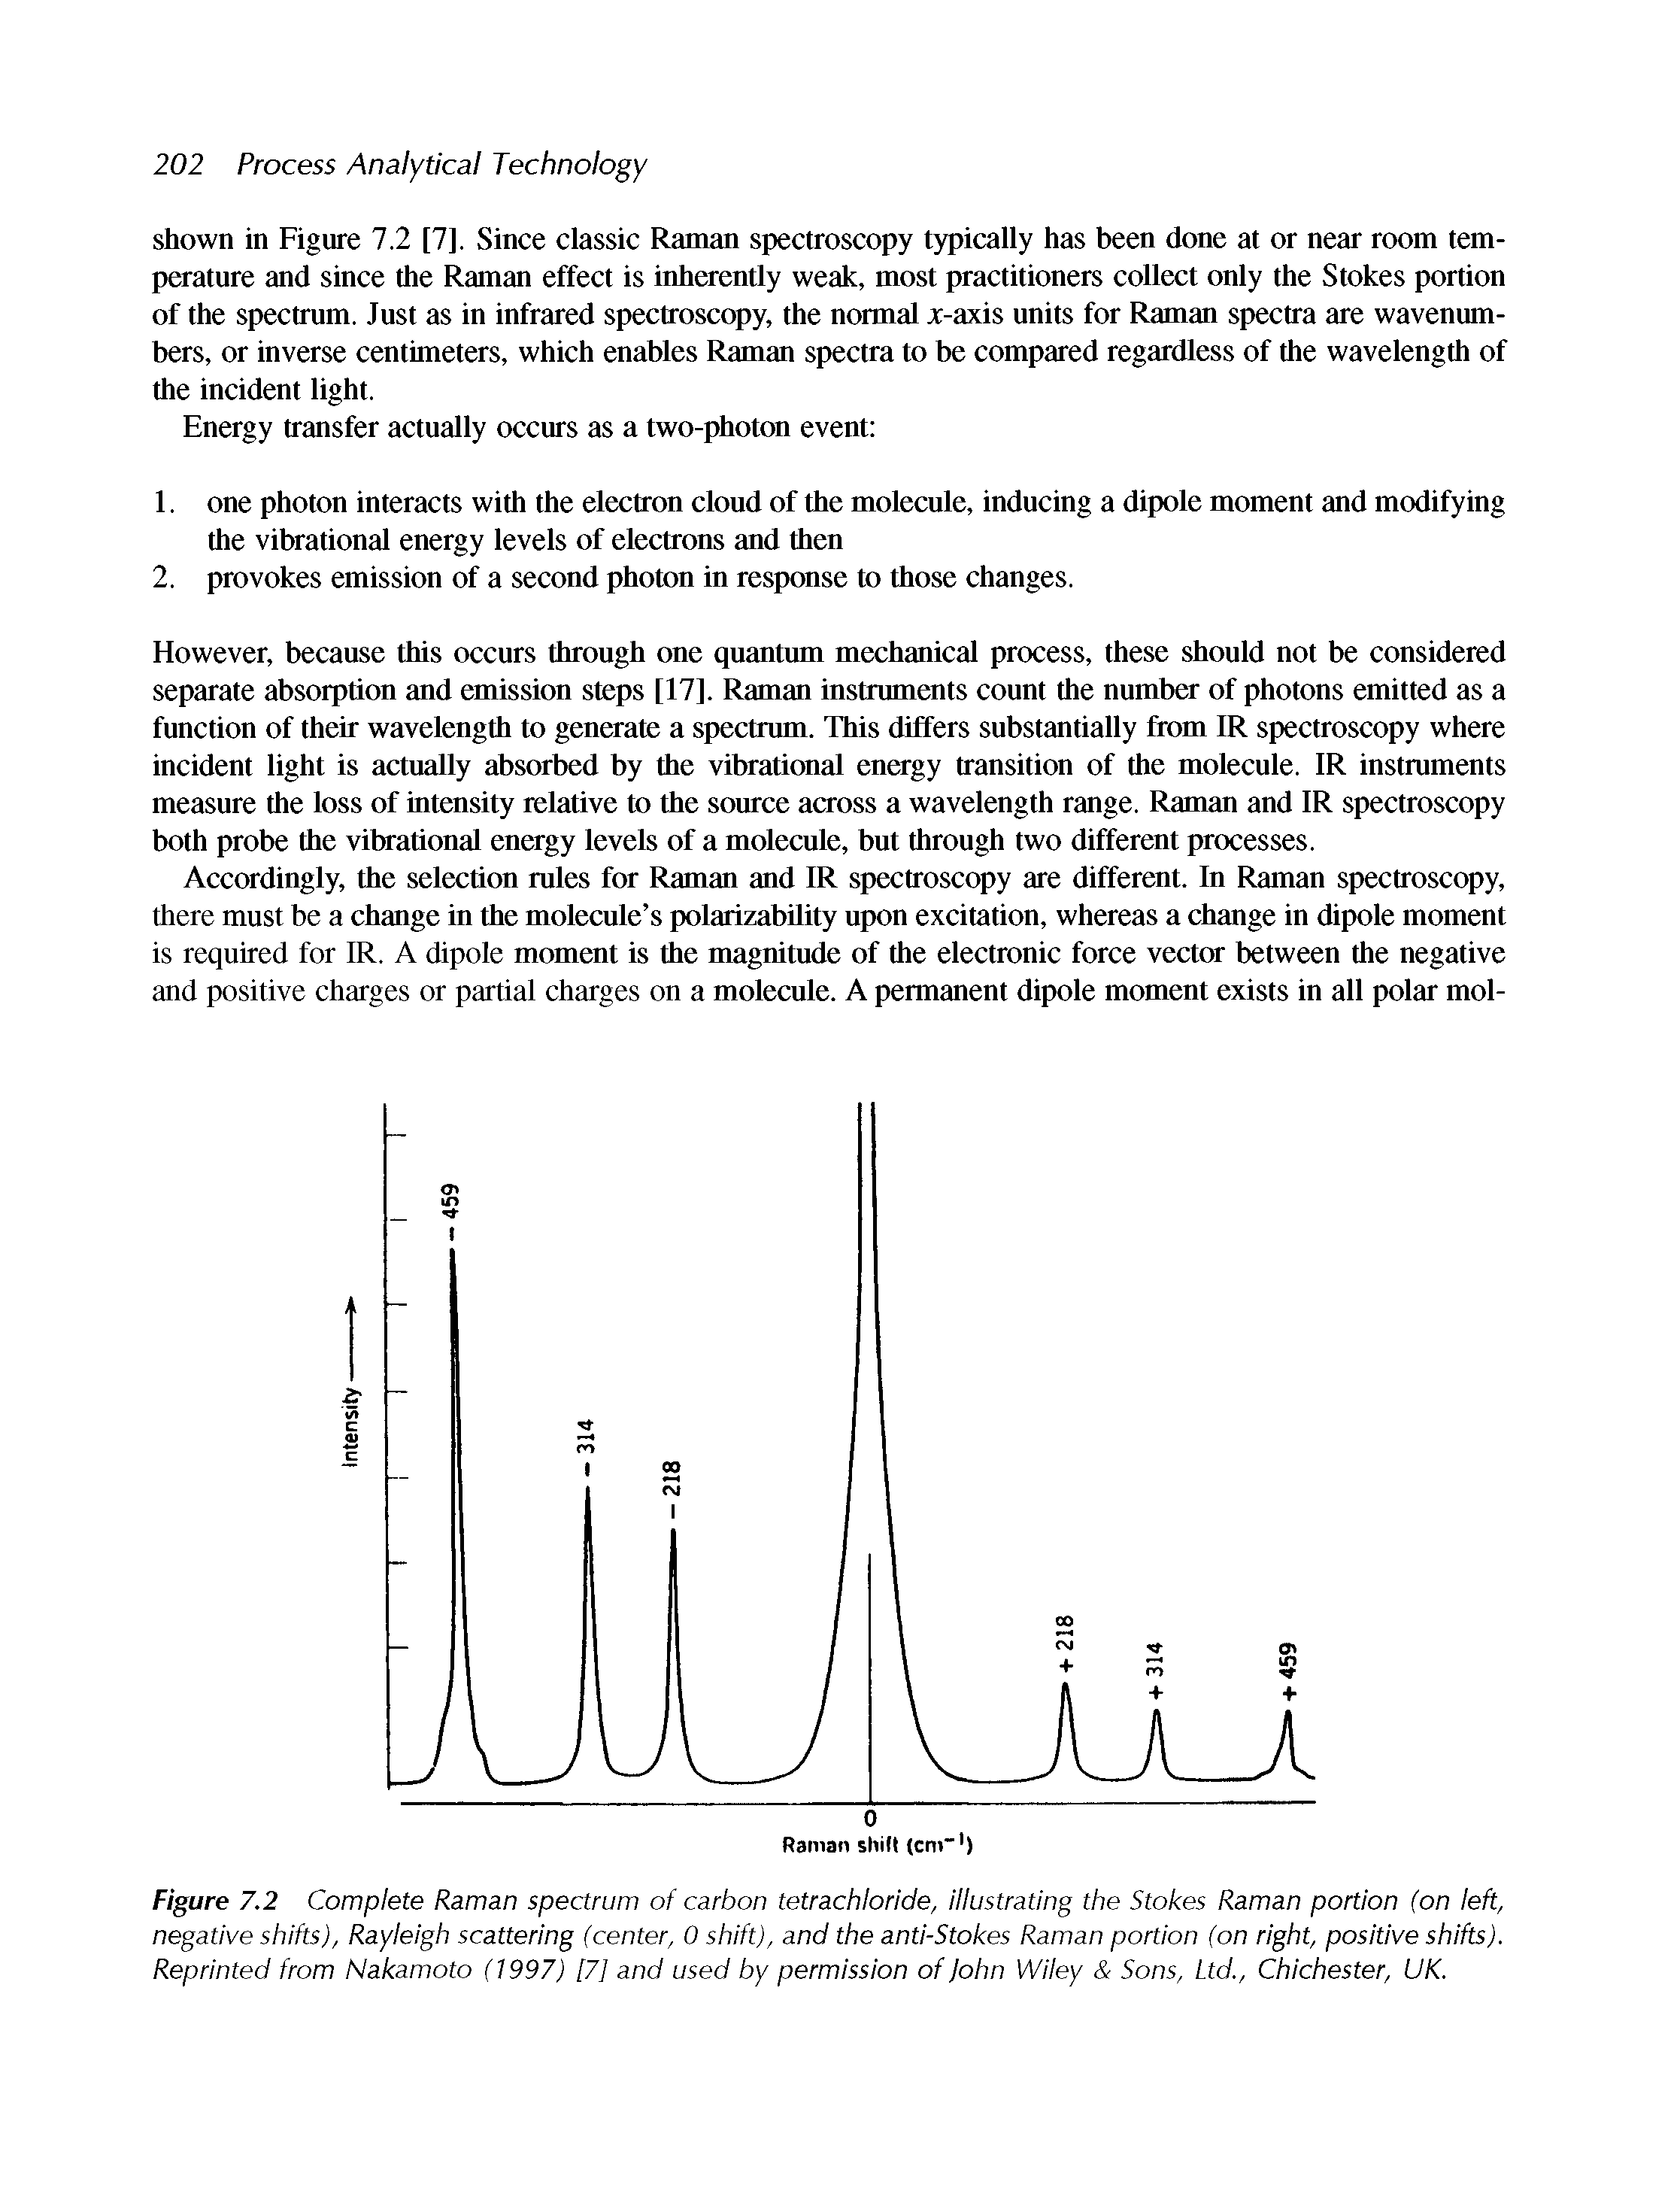 Figure 7.2 Complete Raman spectrum of carbon tetrachloride, illustrating the Stokes Raman portion (on left, negative shifts), Rayleigh scattering (center, 0 shift), and the anti-Stokes Raman portion (on right, positive shifts). Reprinted from Nakamoto (1997) [7] and used by permission of John Wiley Sons, Ltd., Chichester, UK.